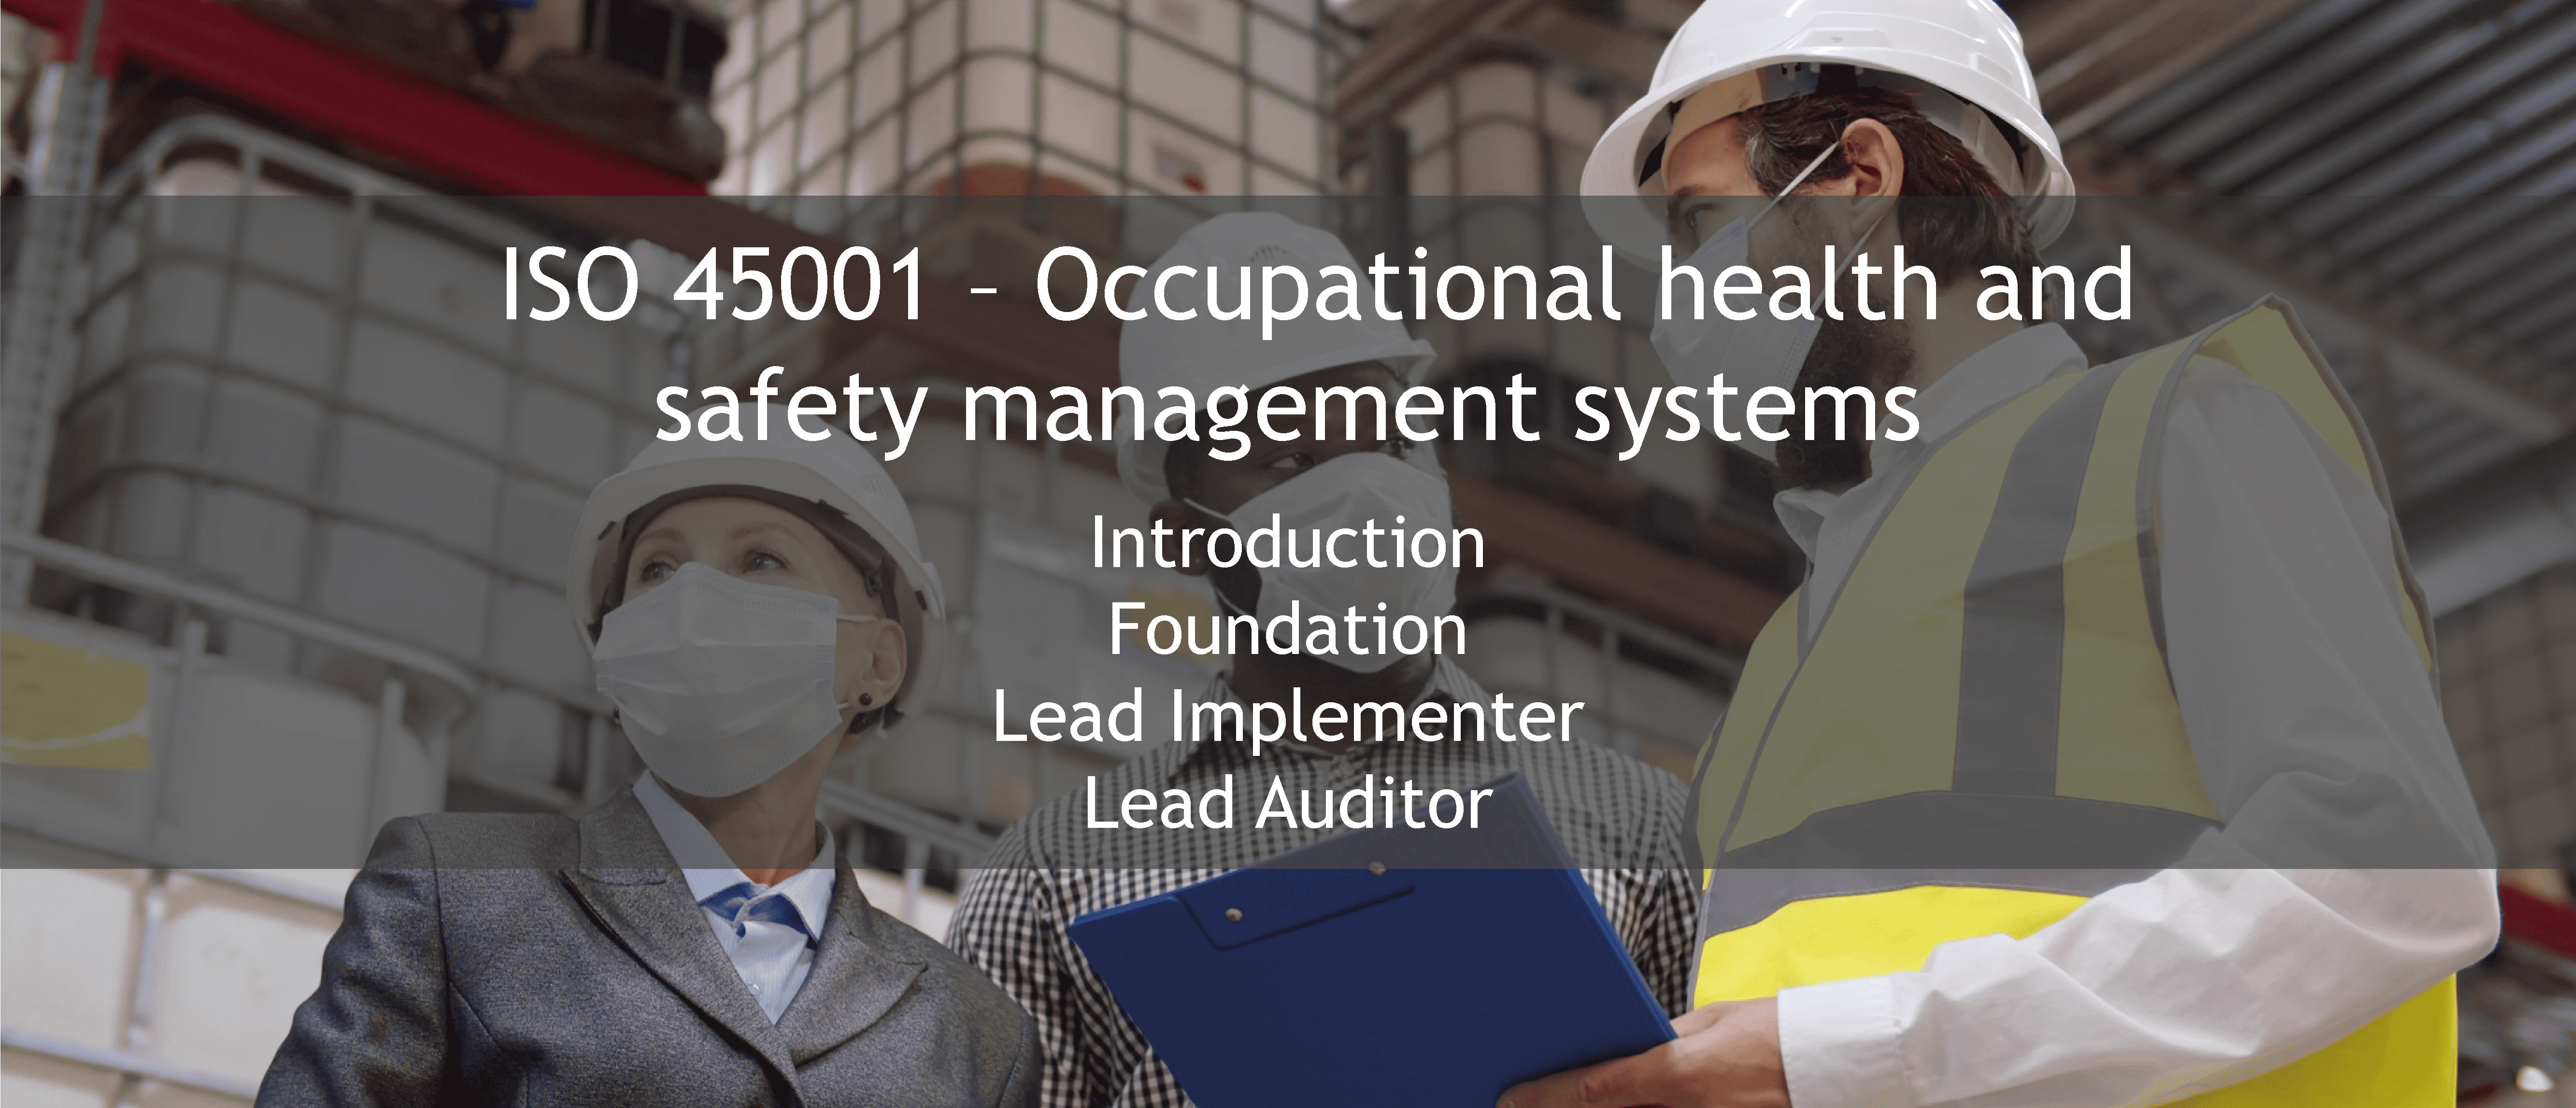 ISO 45001 training offer - ISO 20400 Guidelines for Sustainable Procurement